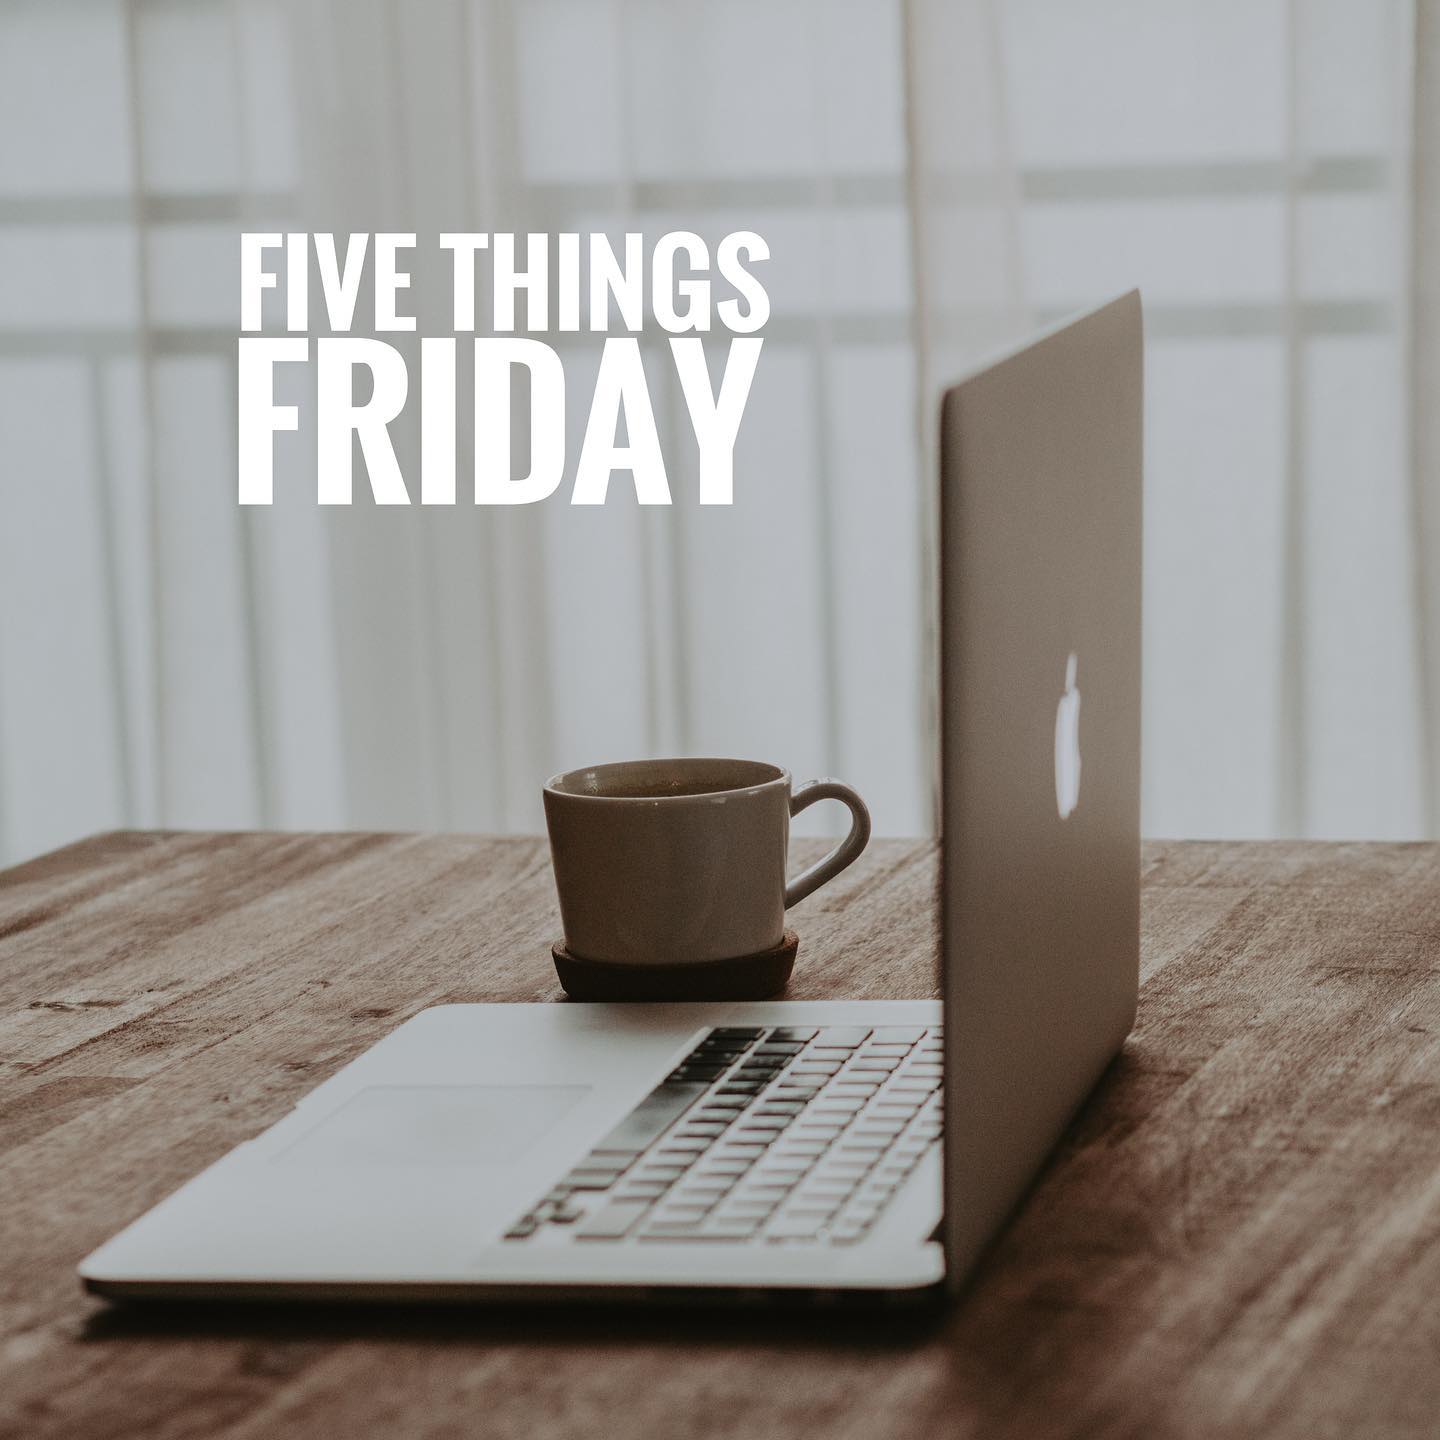 Five Things Friday Vol. 48 (on a Saturday)
Link in bio.
.
#ontheblog #fivethingsfriday